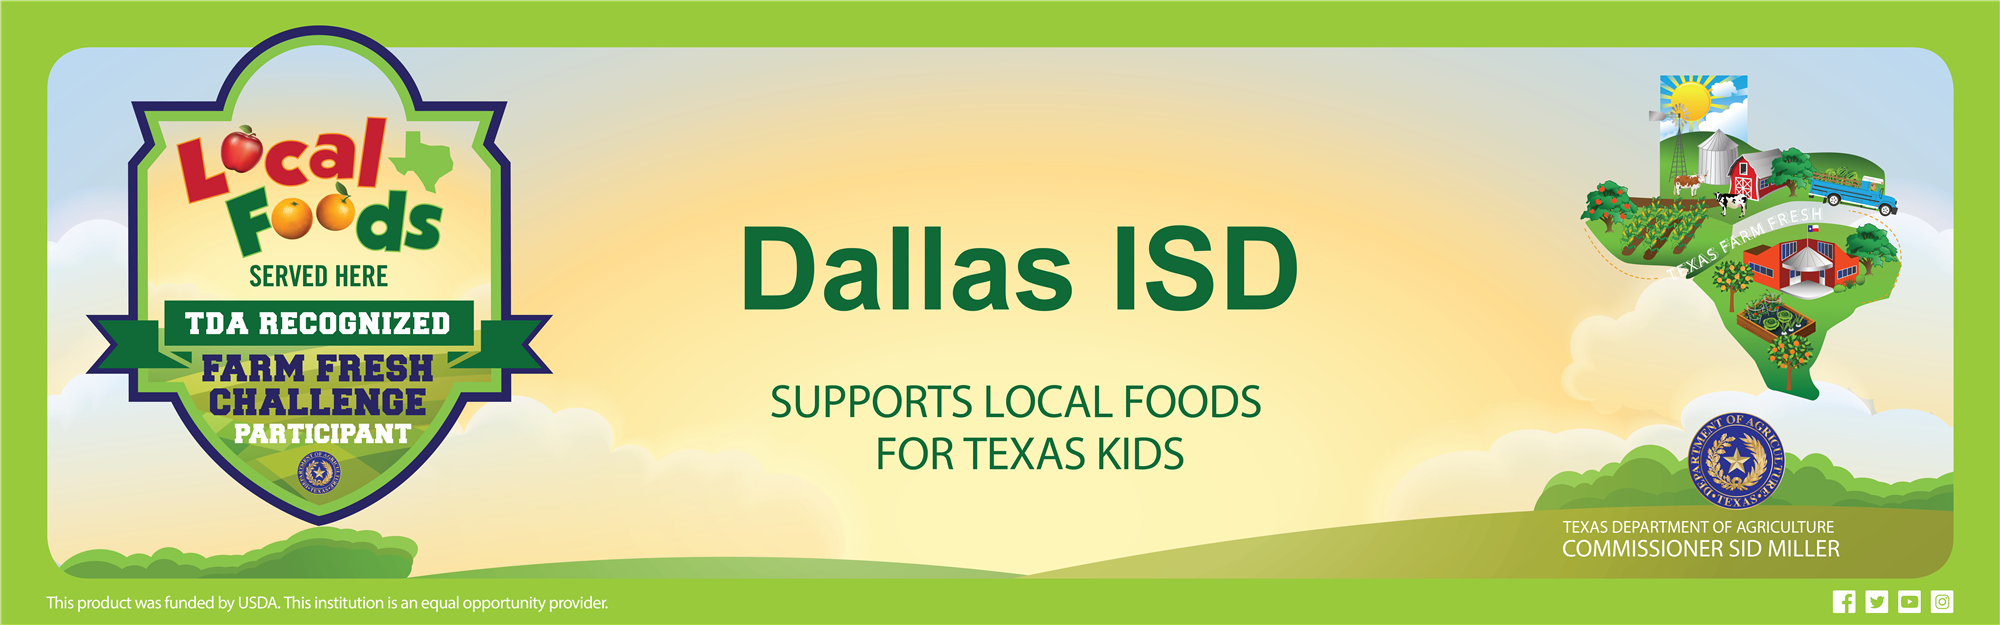 Dallas ISD Supports Local Foods For Texas Kids 